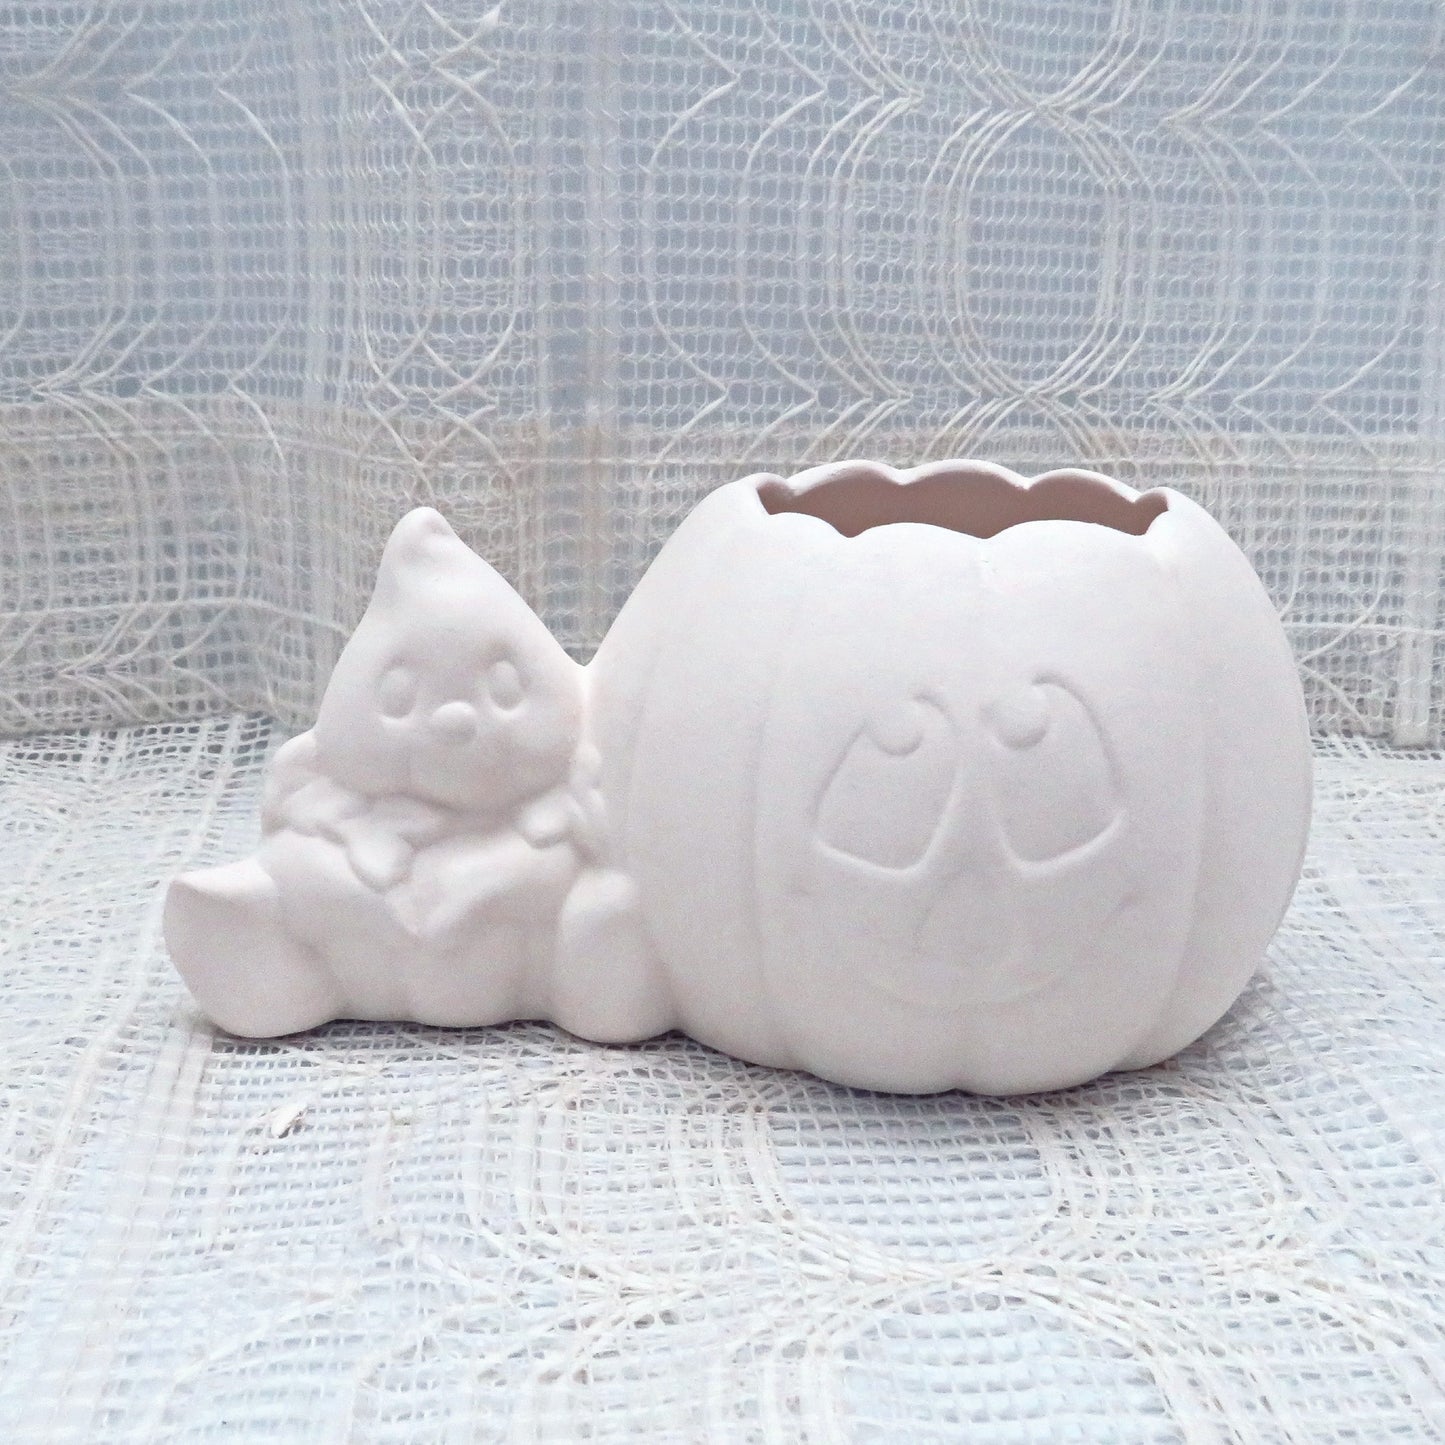 Handmade ready to paint ceramic pumpkin and ghost sitting on a table with an ecru table cloth and curtain